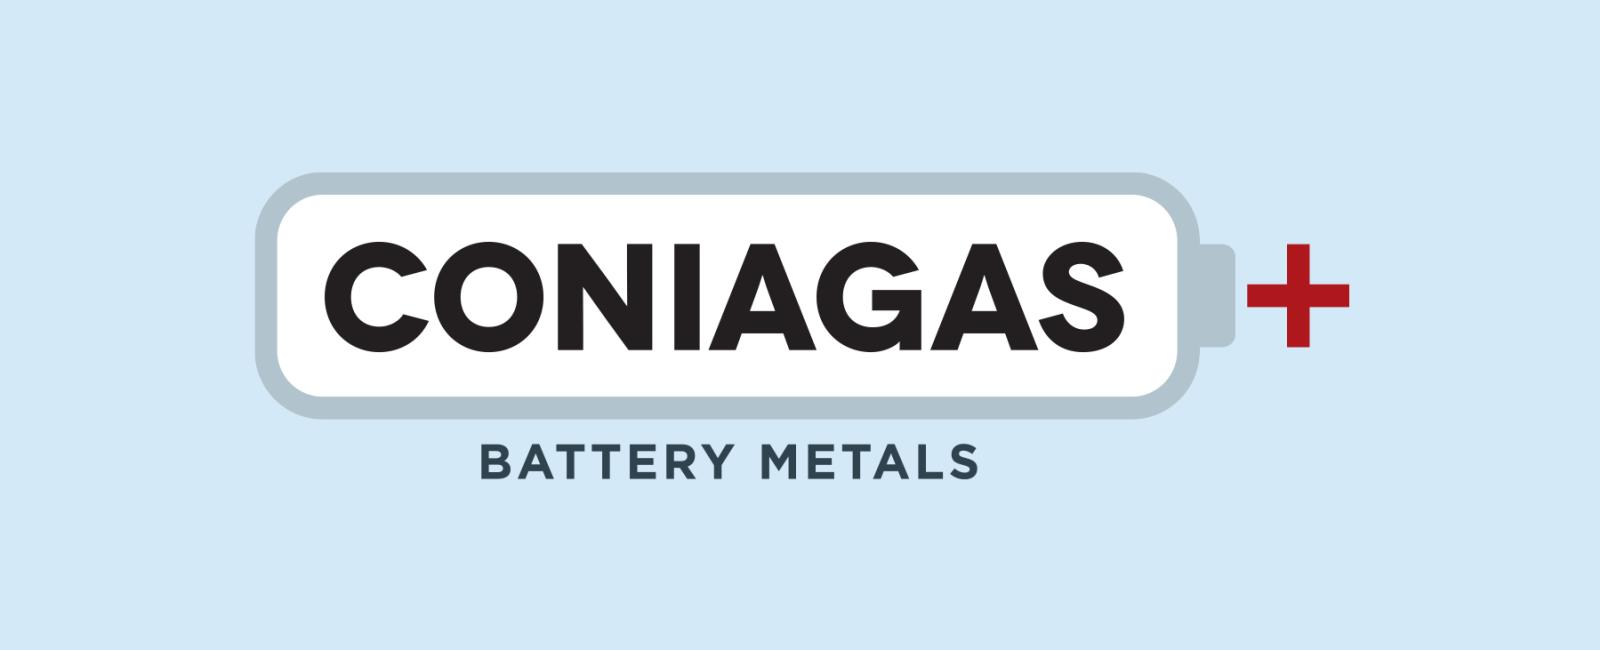 Revised Date of Listing for Coniagas Battery Metals on the TSX Venture